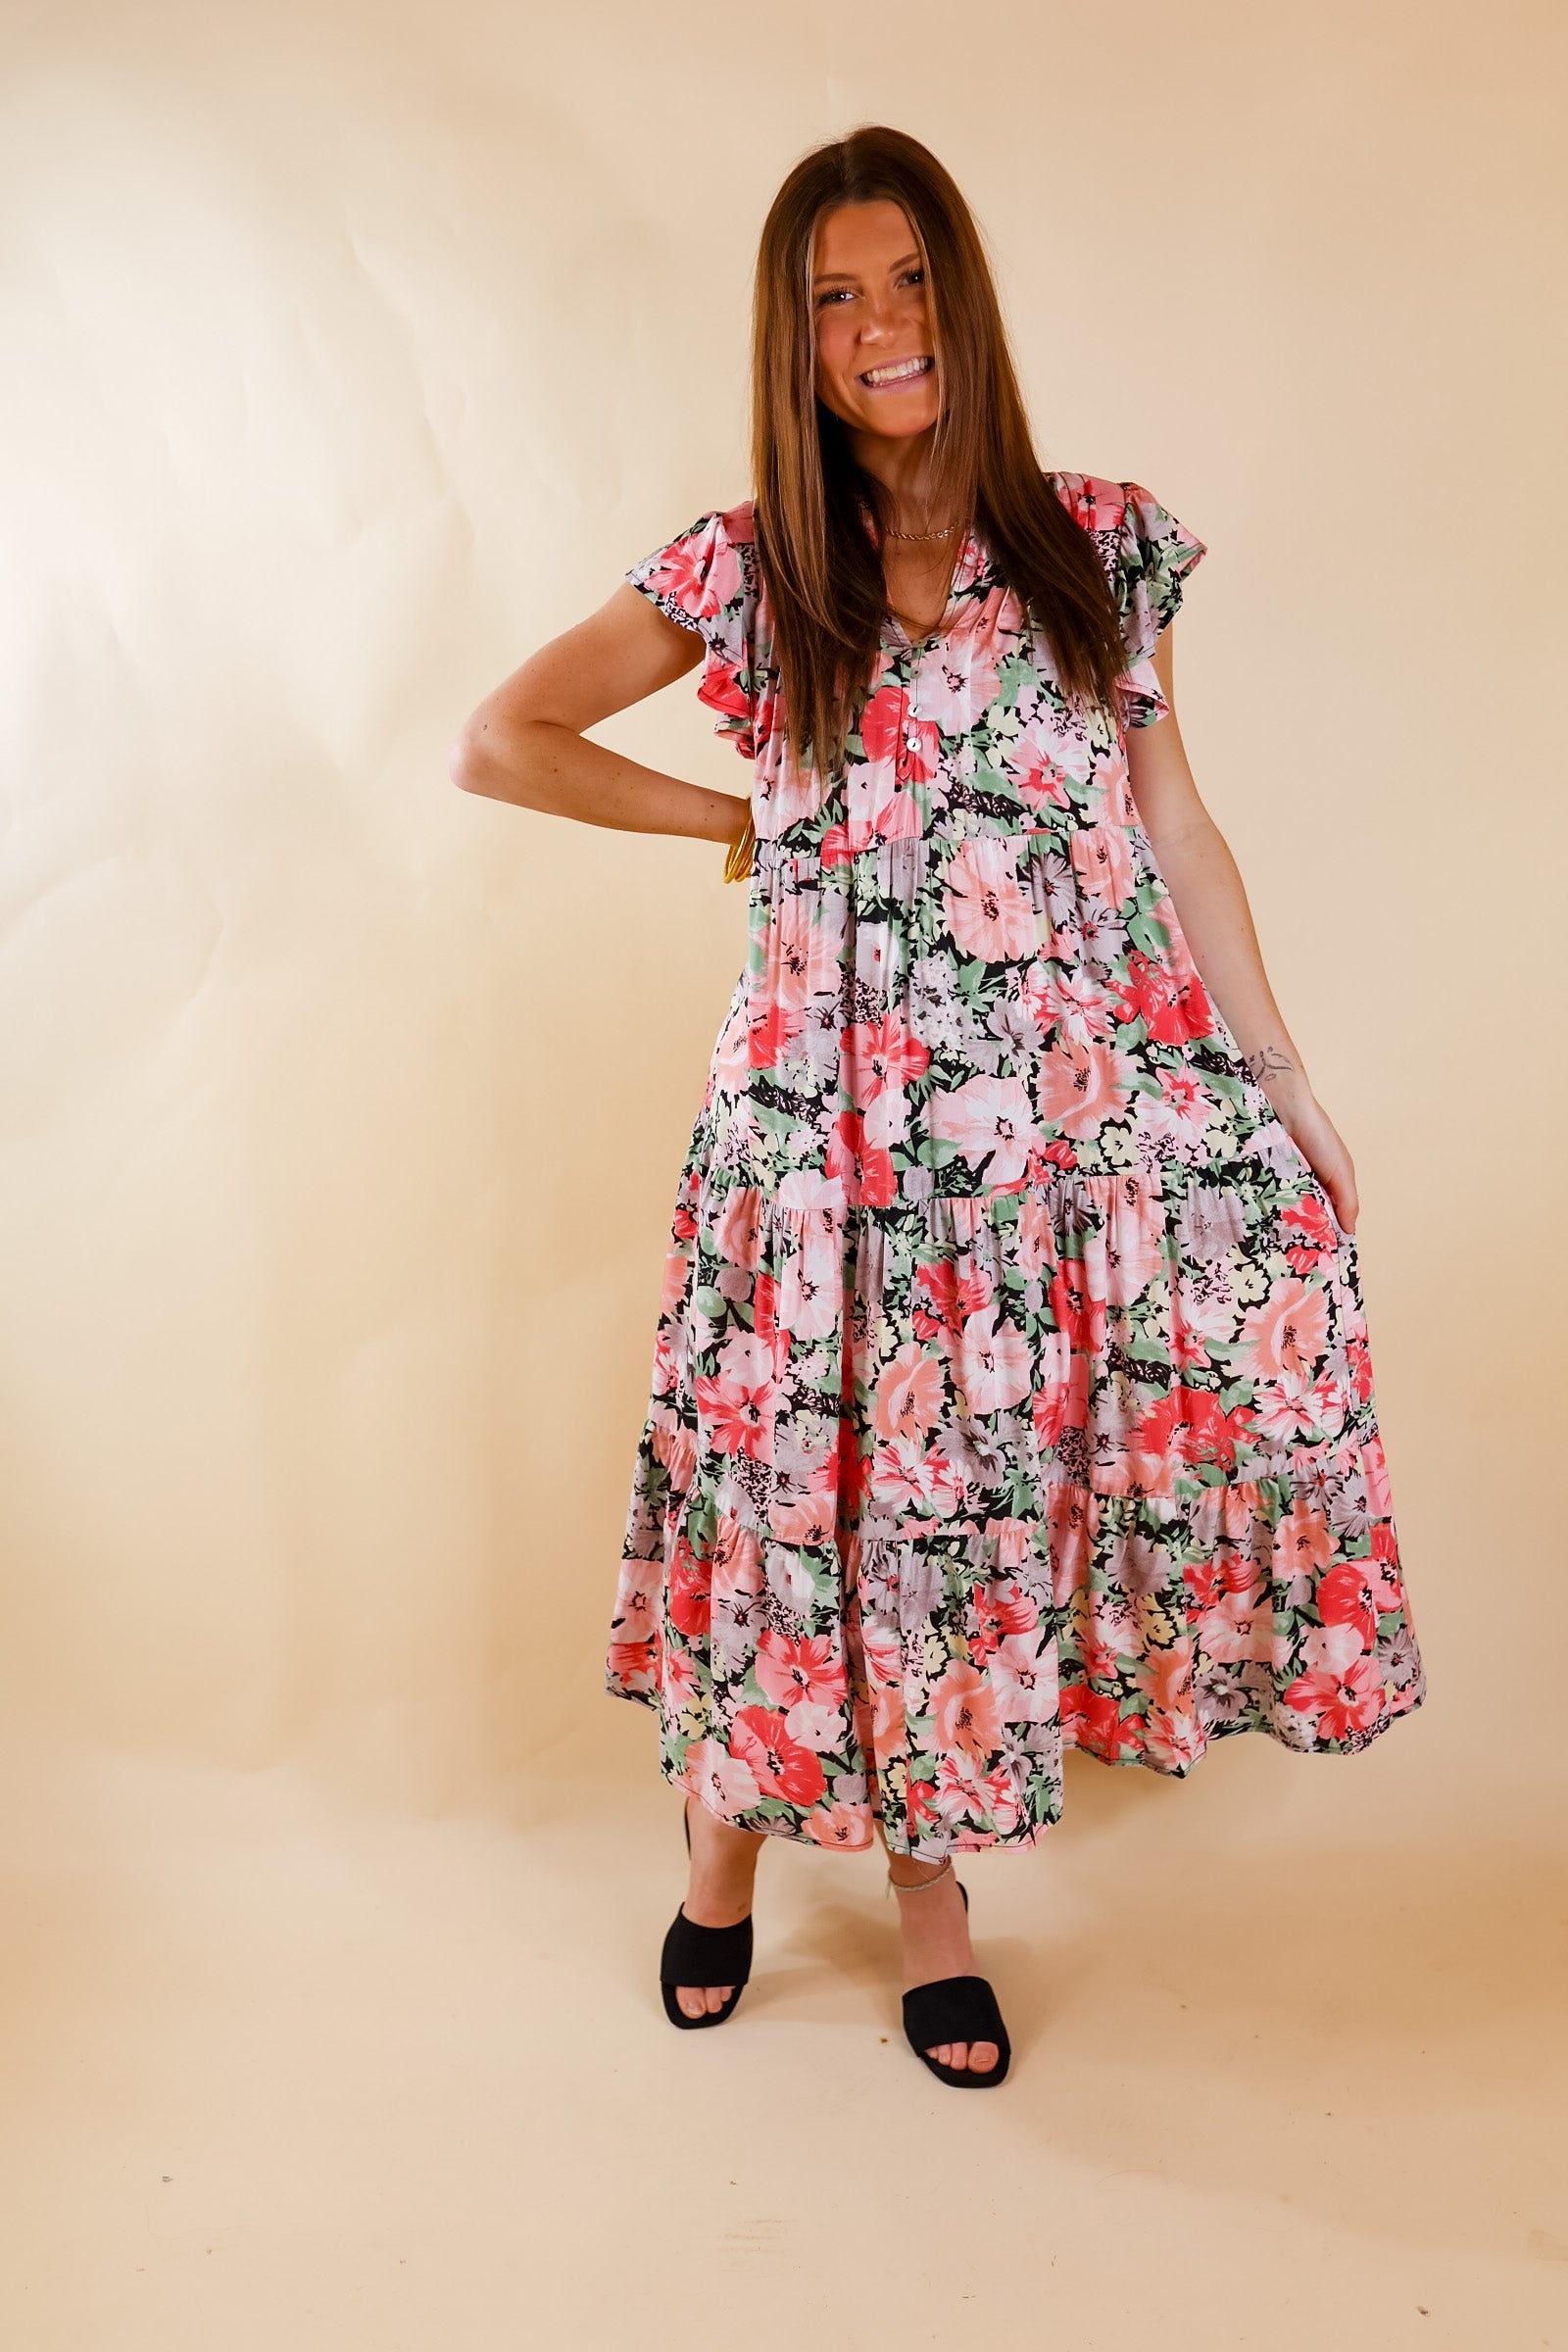 A multicolor relaxed fit midi dress. Item has a floral pattern in light pink, dark pink, pale pink with hints of dark blue/black between each flower. Also features V neckline, ruffled flowy sleeves, and pleated skirt. Item is pictured on a pale pink background